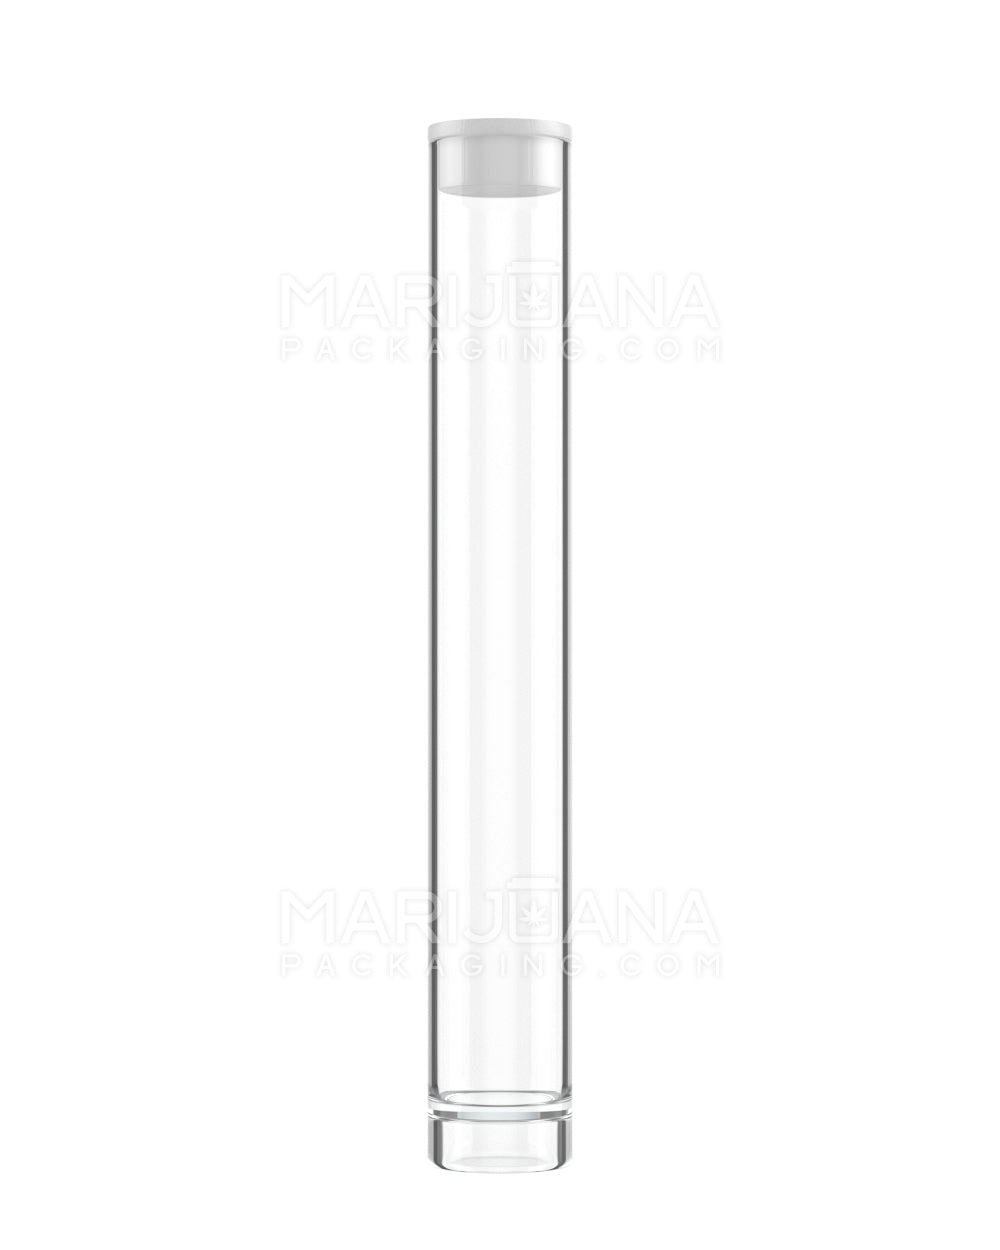 Buttonless Vape Cartridge Tube w/ White Cap | 86mm - Clear Plastic - 500 Count - 1